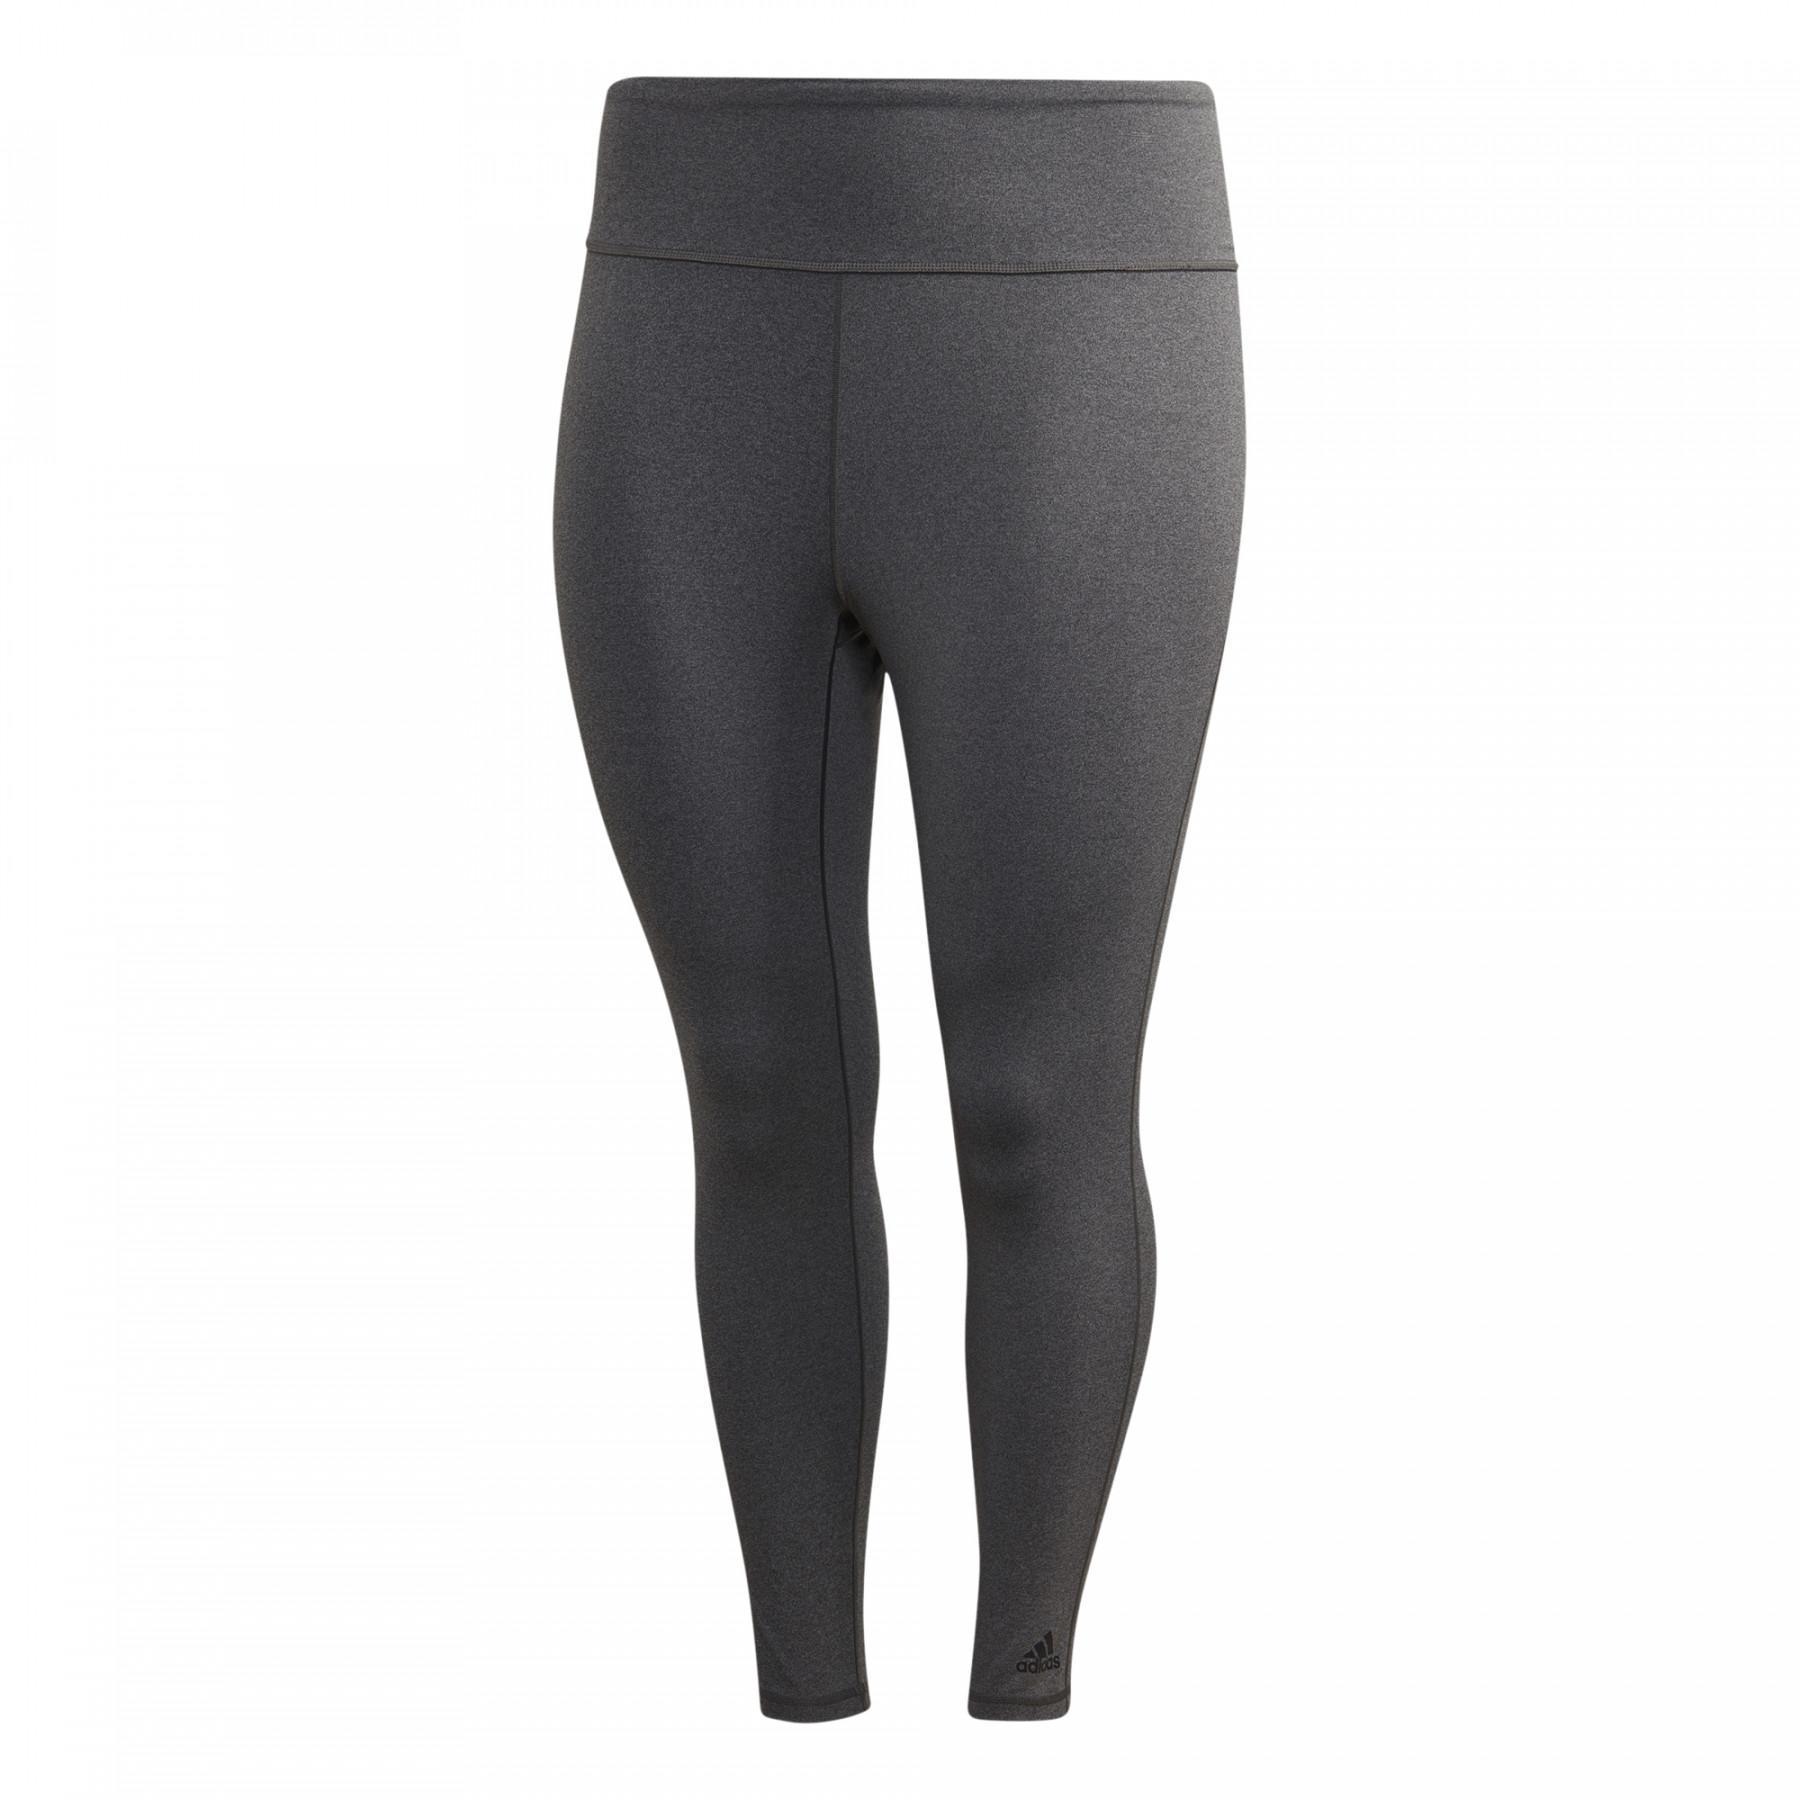 Women's tights adidas Believe This Solid 7/8